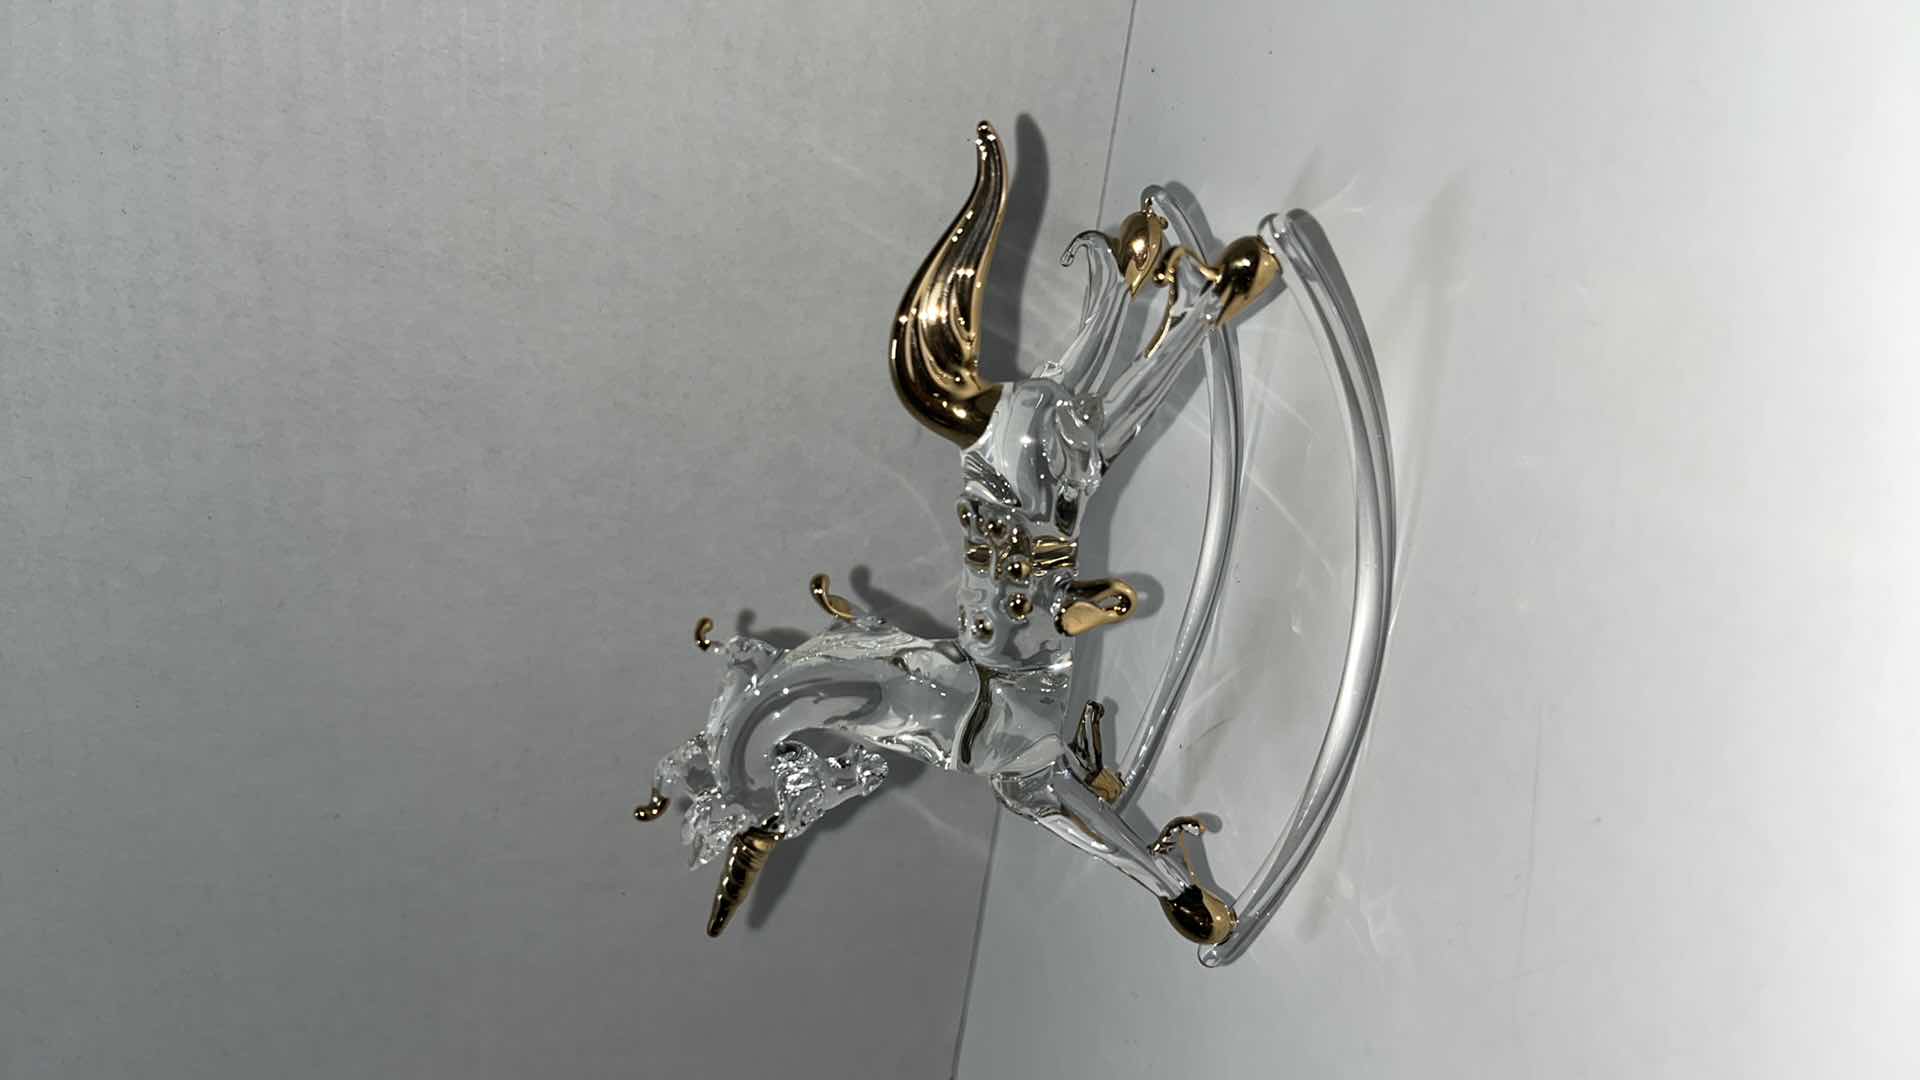 Photo 3 of HAND BLOWN CLEAR GLASS ROCKING UNICORN W GOLD ACCENTS 4.75” X 2” H4”W CRYSTAL ROCKING HORSE W GOLD ACCENTS (2)